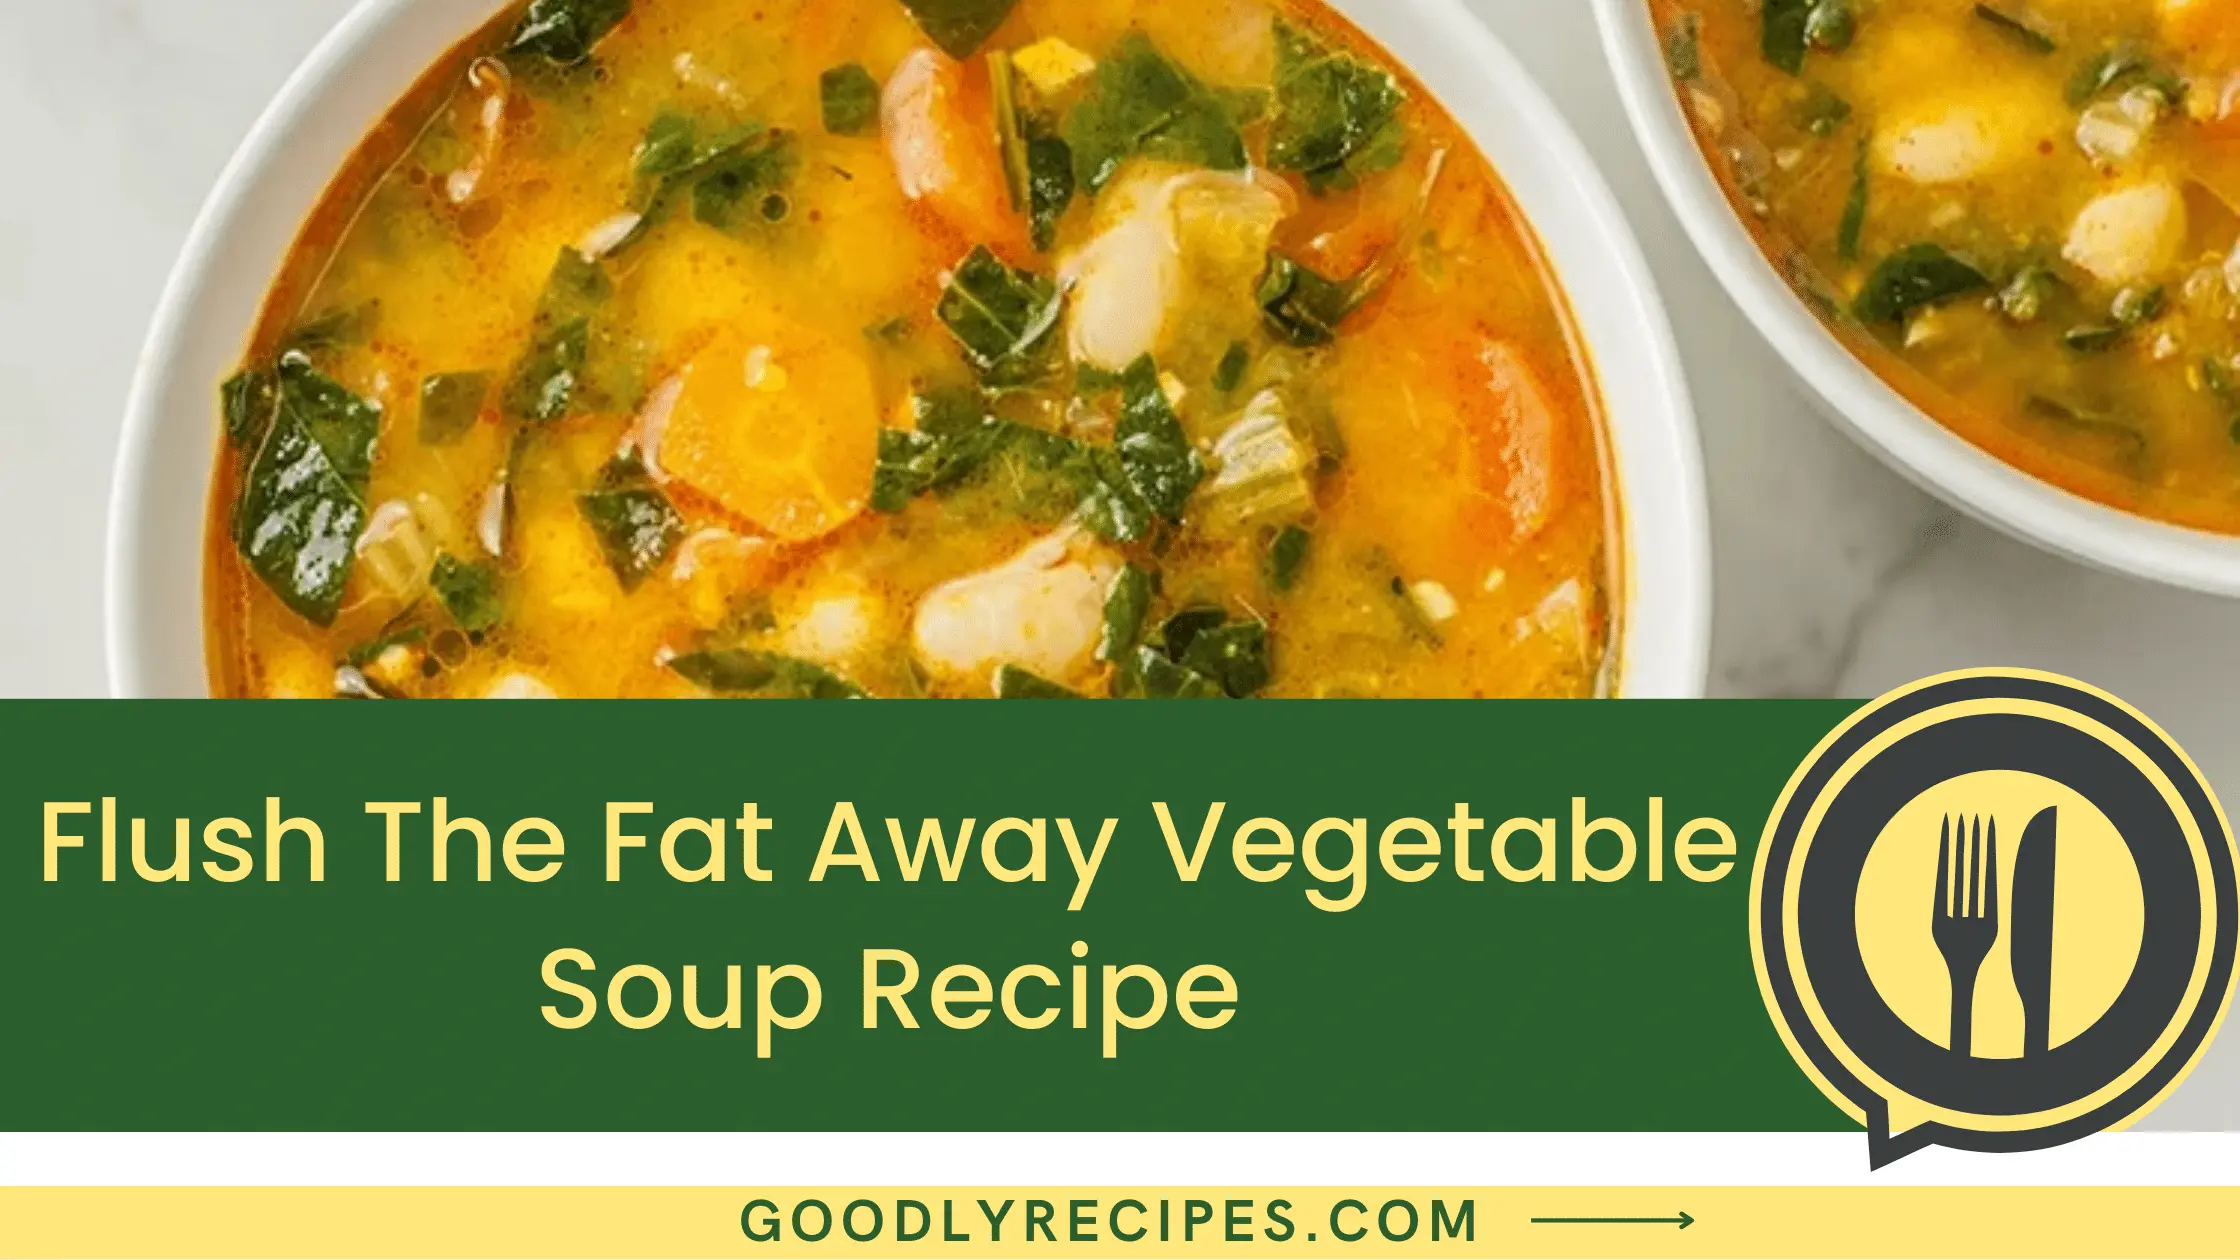 Flush The Fat Away Vegetable Soup Recipe